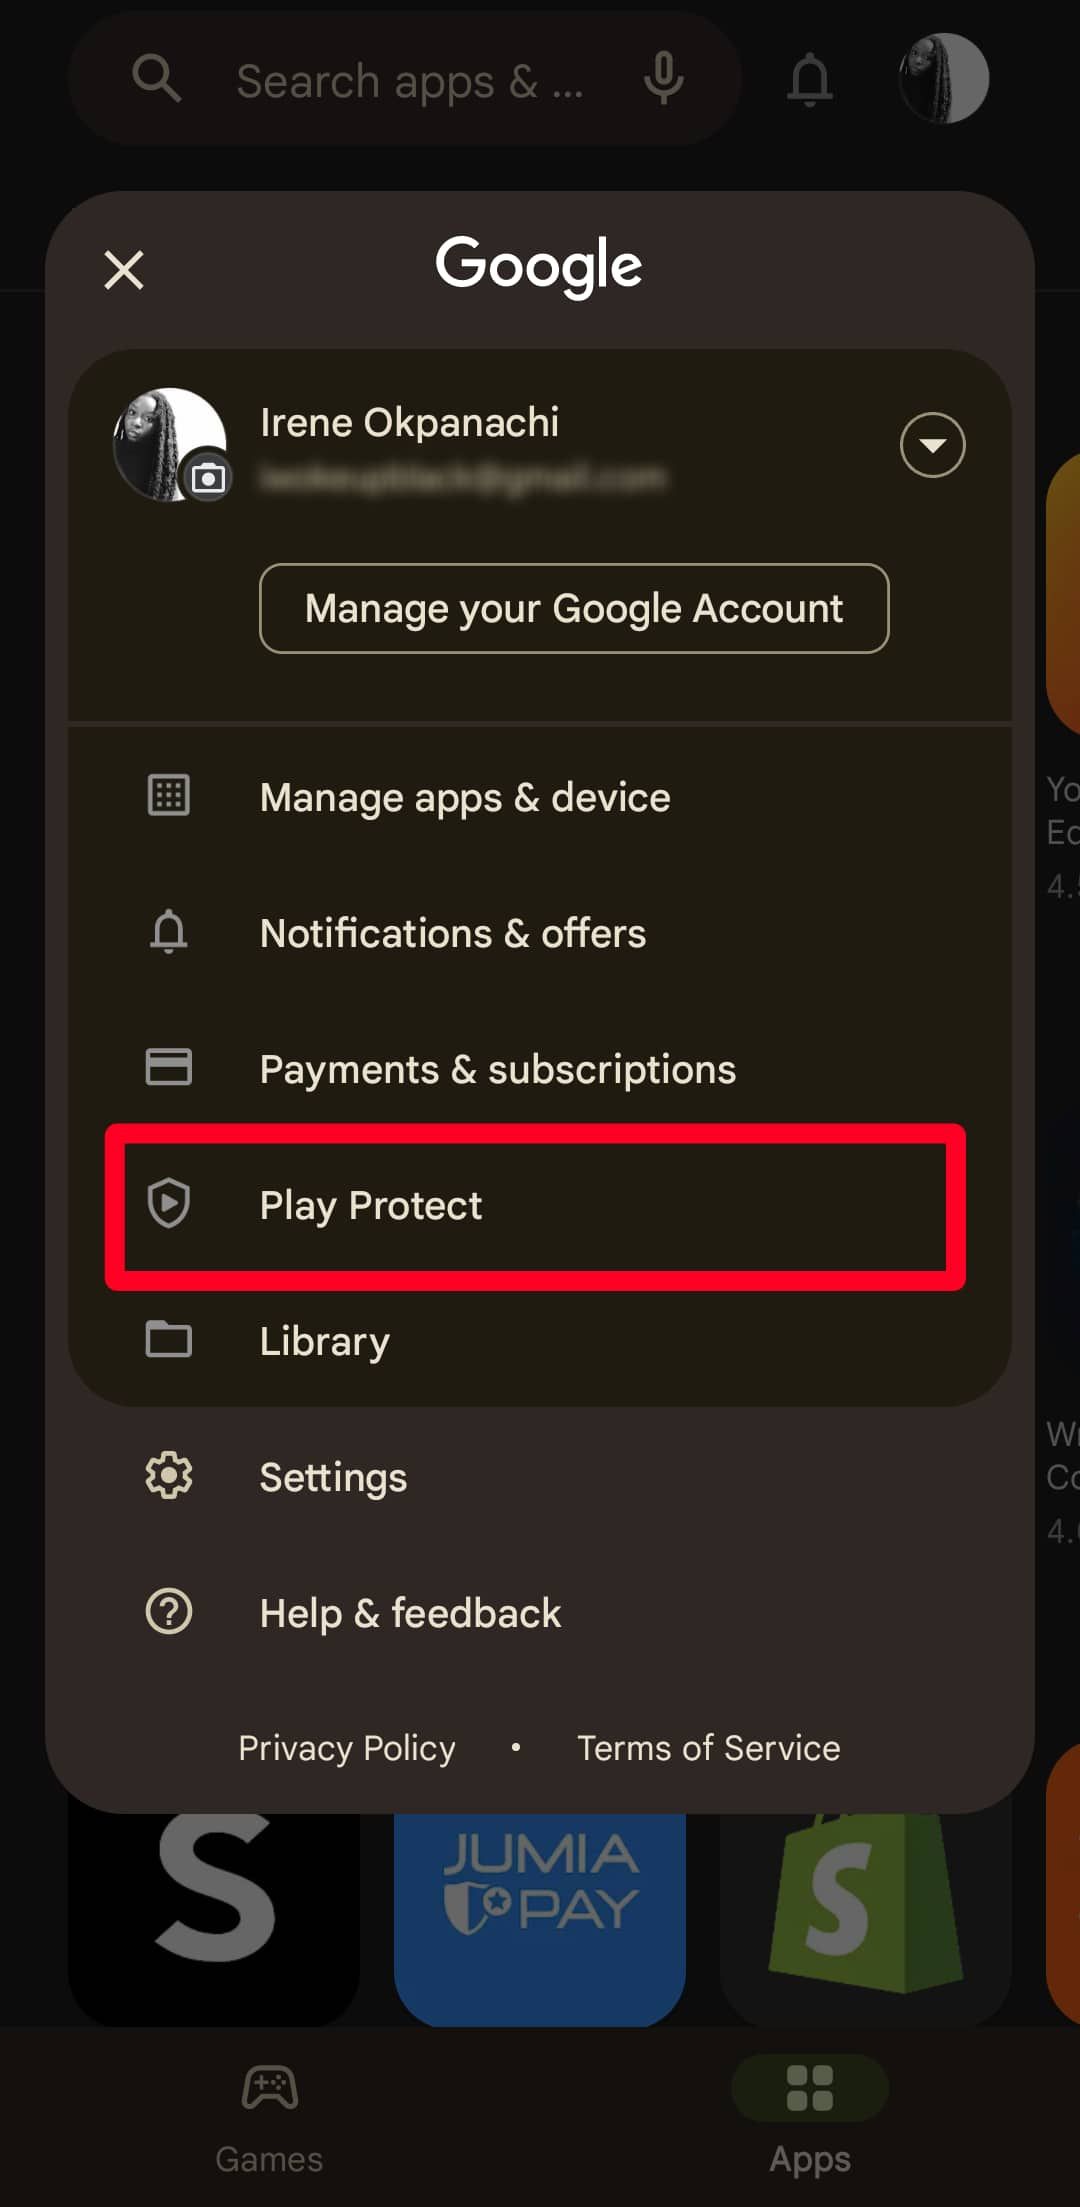 Play Protect option in Google Play Store menu